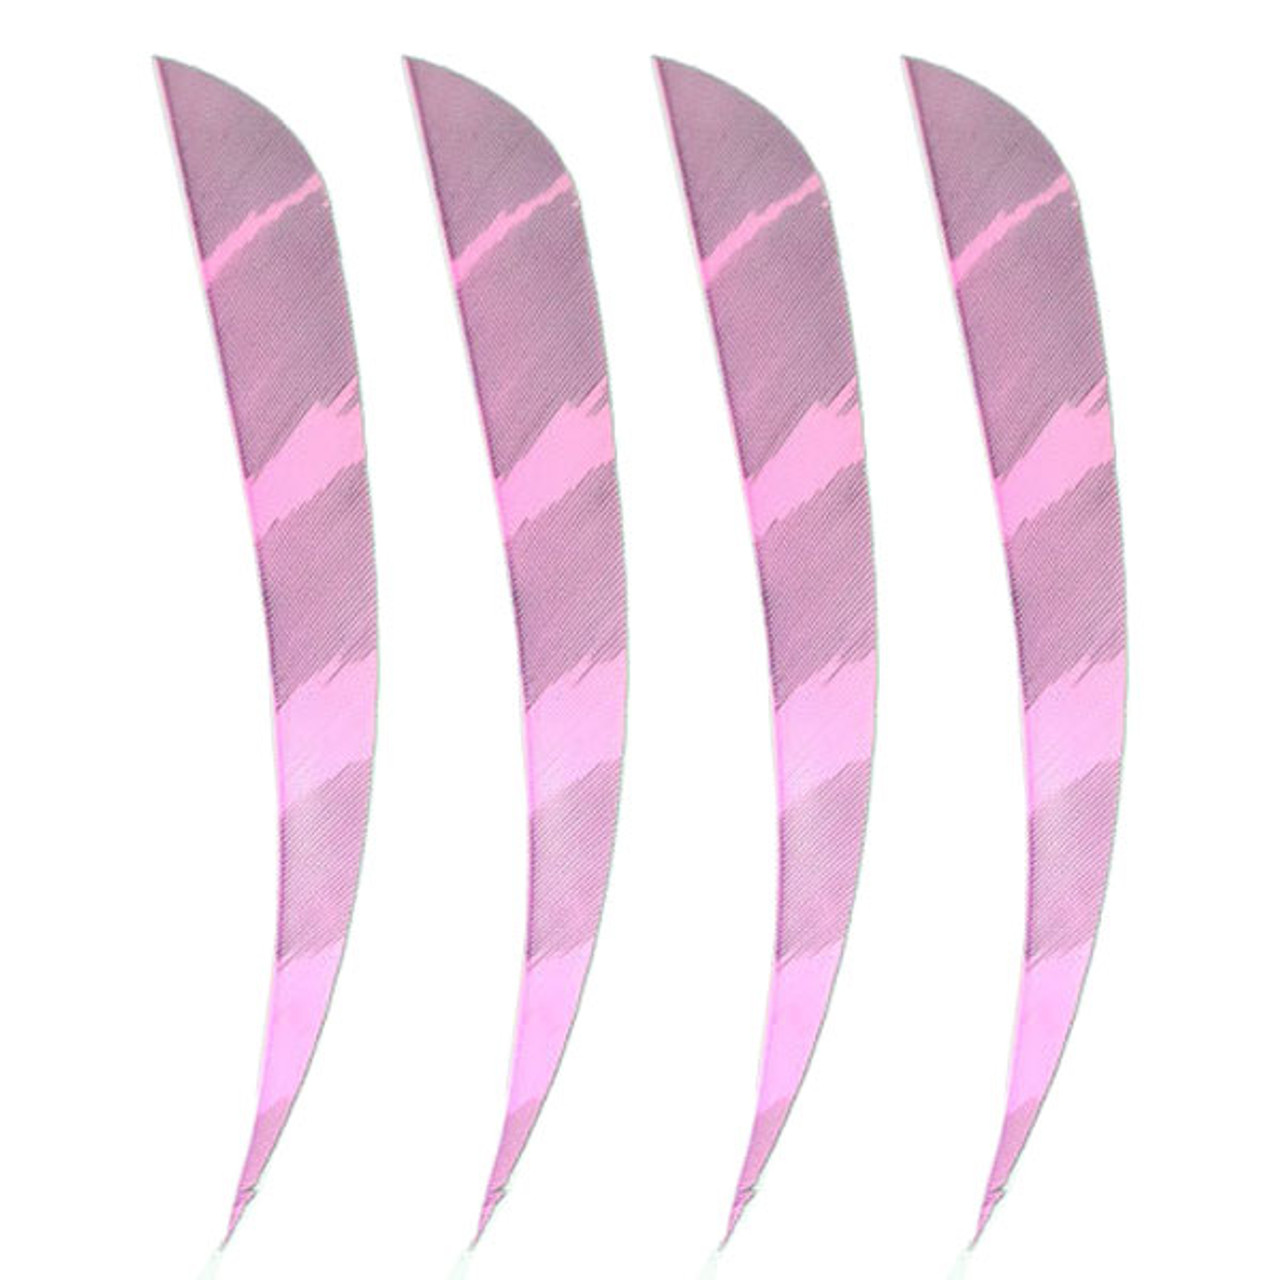 Muddy Buck Gear 4" Parabolic RW Barred Feathers - 36 Pack (Flo Pink)